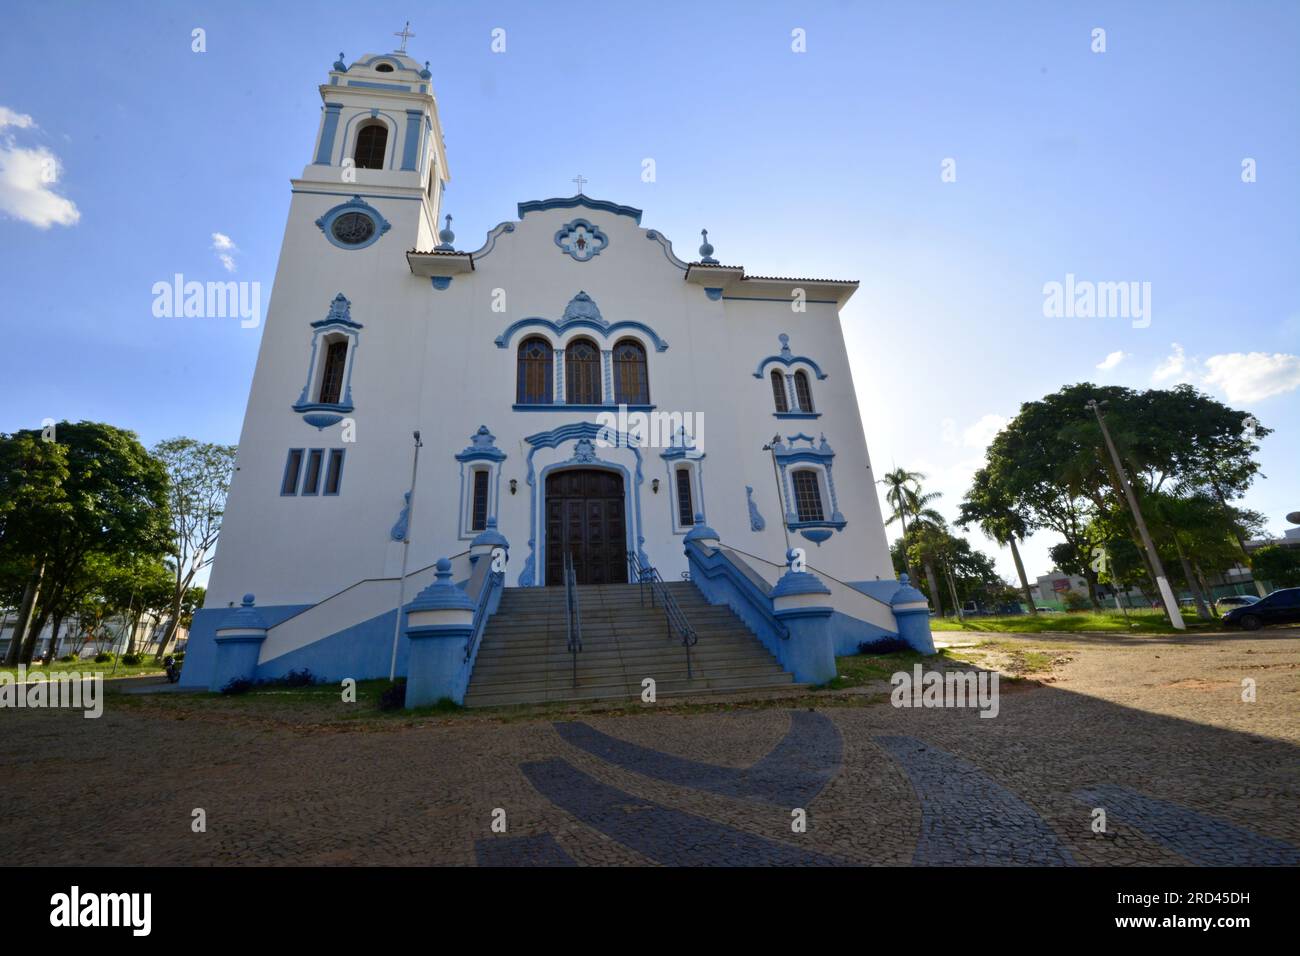 Catholic church. in wide-angle photo showing the facade of the old building. With staircase in the center Stock Photo